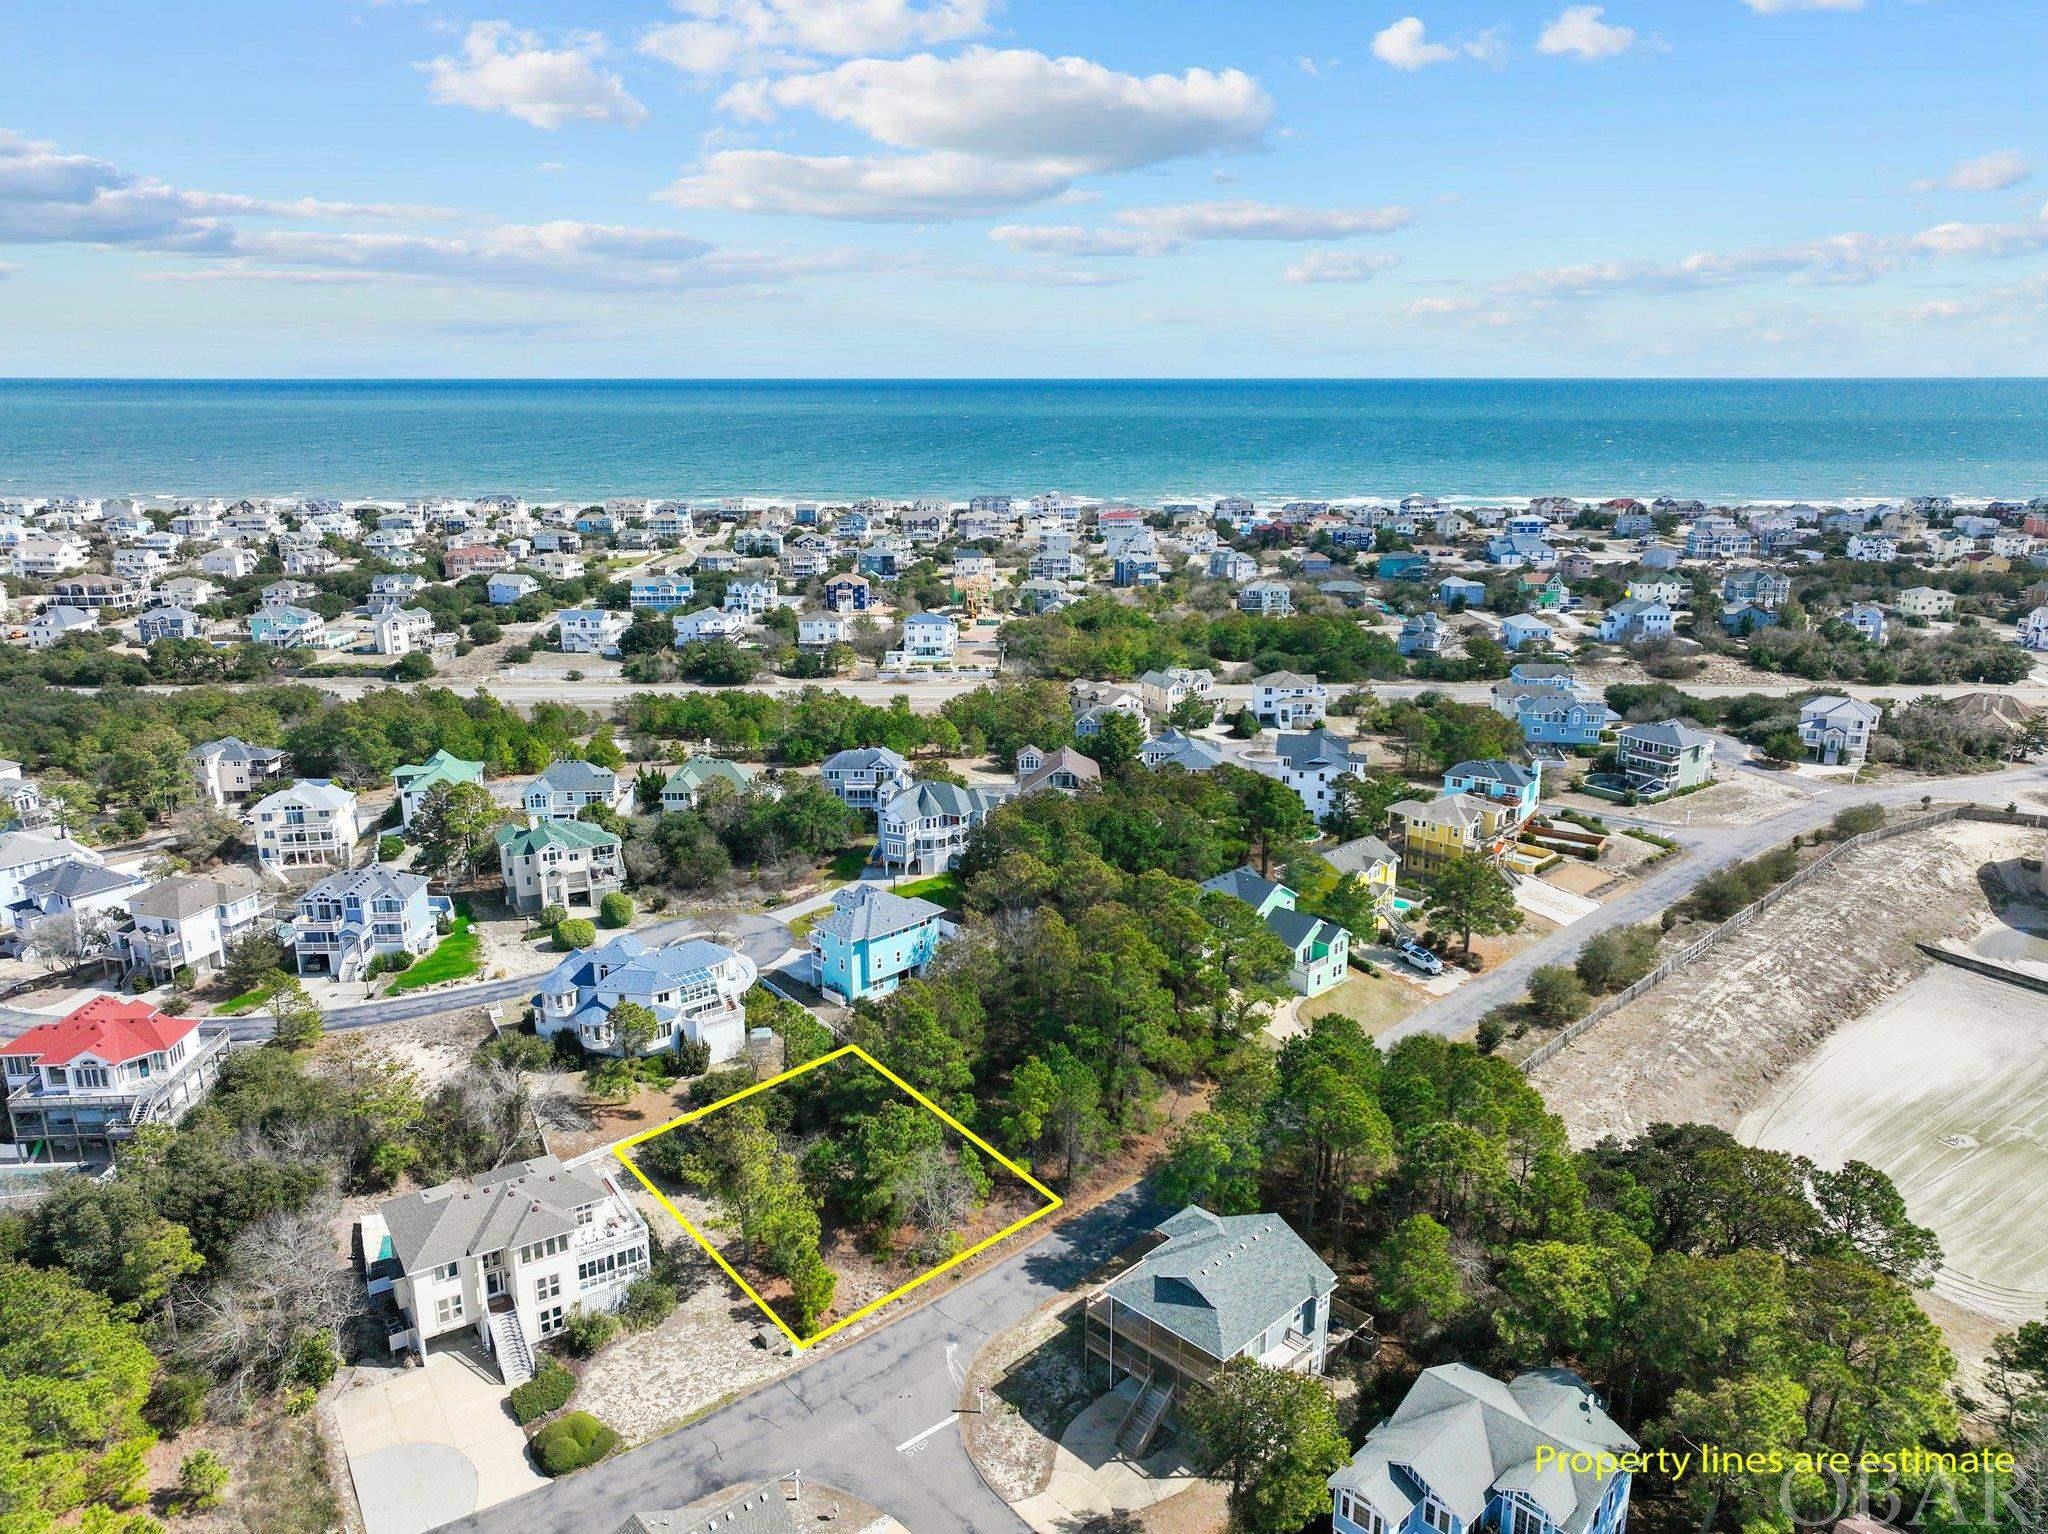 Don't miss out on this prime building site in Monteray Shores! Located in an x flood zone, this gently sloping lot is perfect for your custom-built dream home. Enjoy potential sound views and breathtaking OBX sunsets from your very own deck. Or, build with vacation rental investment or your retirement future in mind. Plus, with shopping, restaurants, and the beach within walking distance, convenience is key. Monteray Shores offers wonderful community amenities such as an outdoor pool, clubhouse with fitness center, tennis and basketball courts, and a playground for the kids.  There is also a convenient boat ramp, sound side pier and overlook.  Now is the time to make your OBX dreams come true.  What are you waiting for?